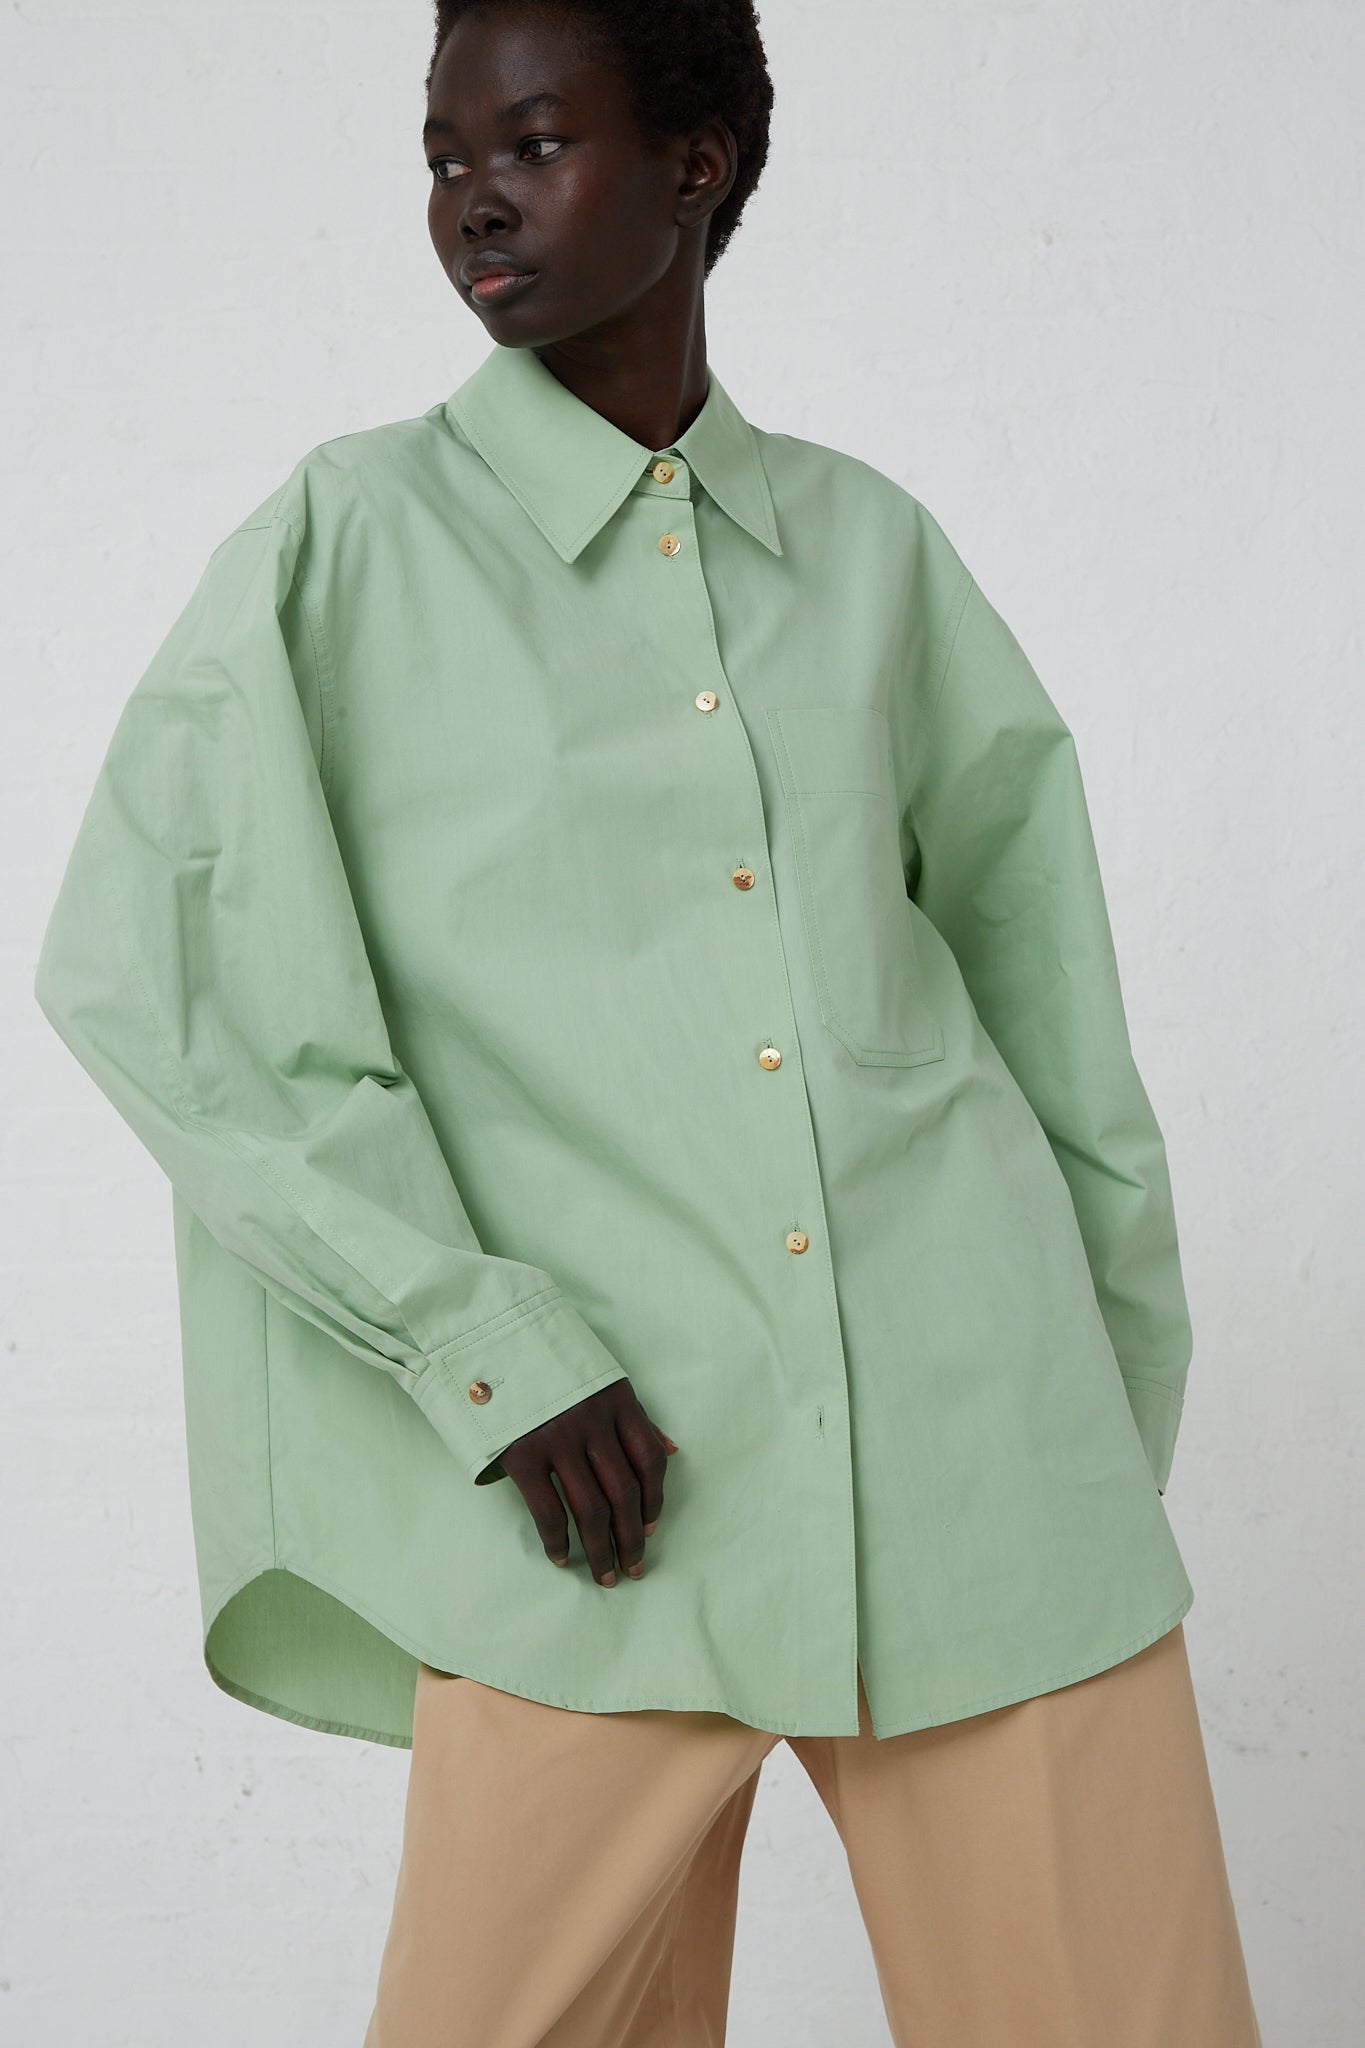 The model is wearing a Rejina Pyo Organic Cotton Caprice Shirt in Mint.